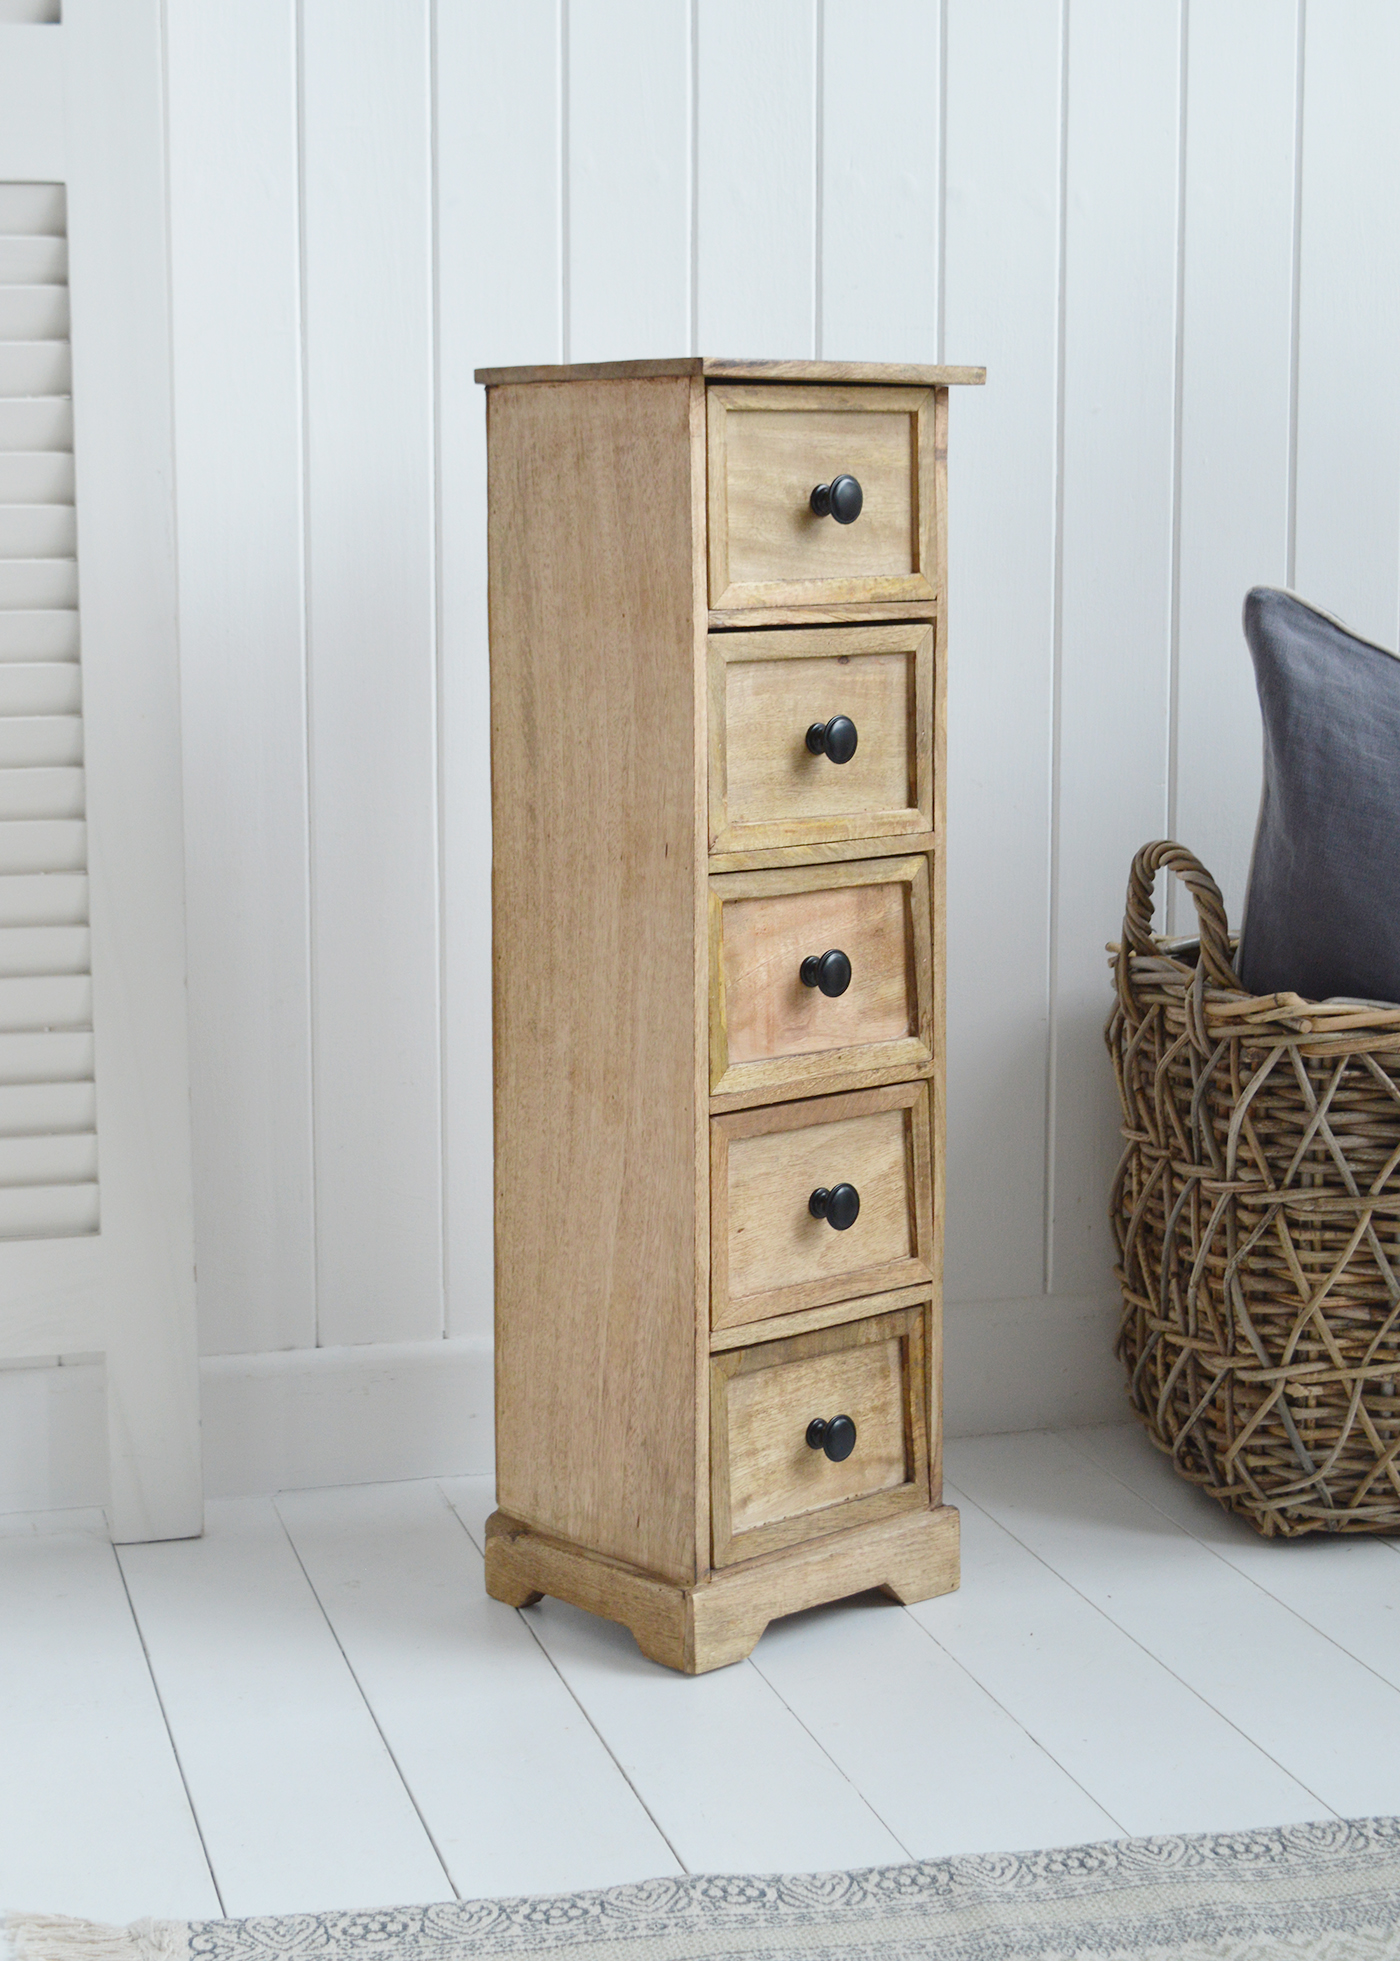 The White Lighthouse living room furniture. Dorset narrow cabinet or lamp table with drawers for living room storage 23cm wide. New England furniture for coastal, country and modern farmhouse styled homes and interiors